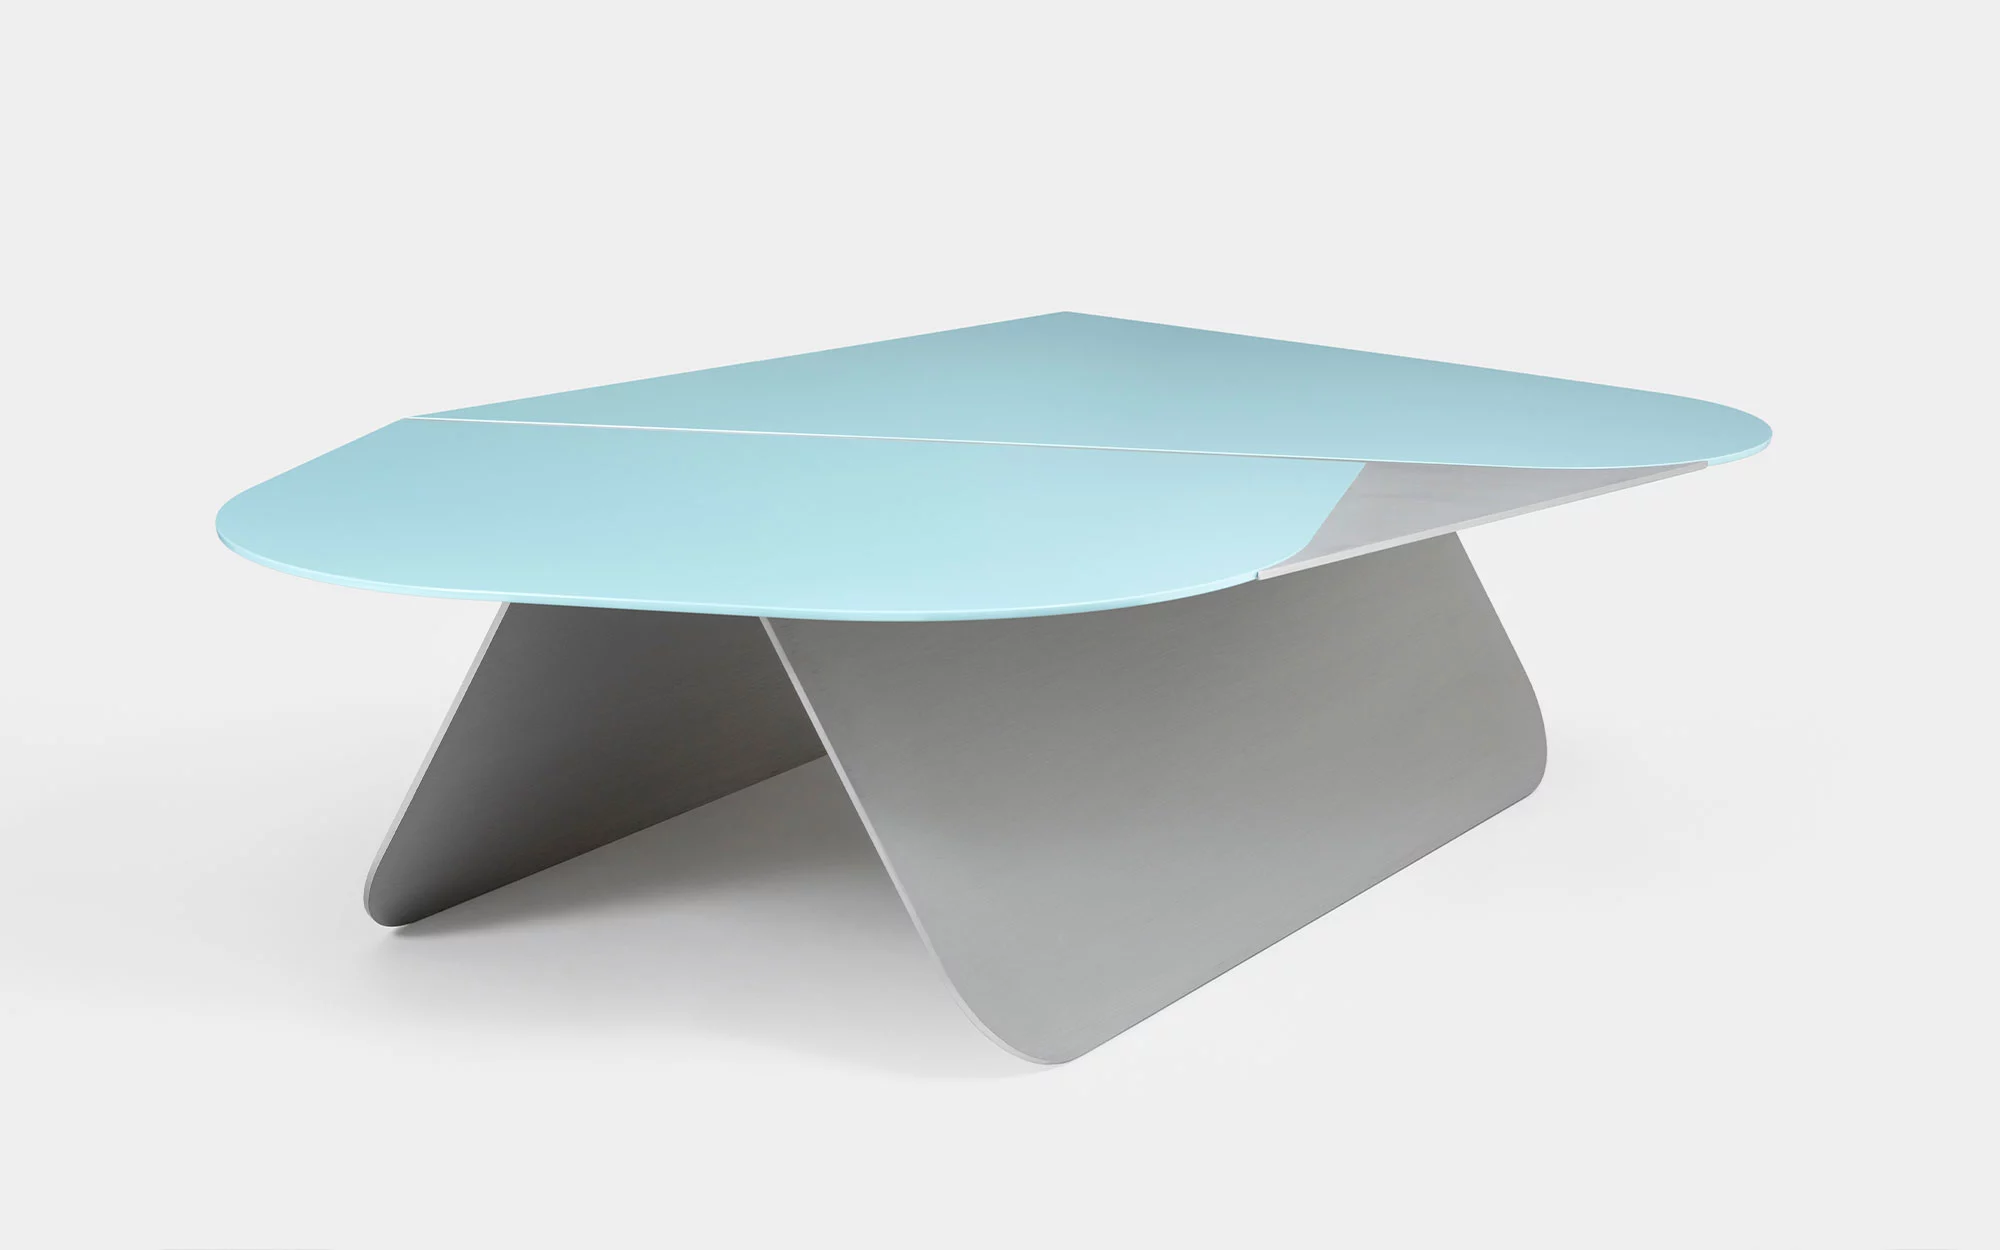 Large DB Coffee Table - Pierre Charpin - @home new chapter .